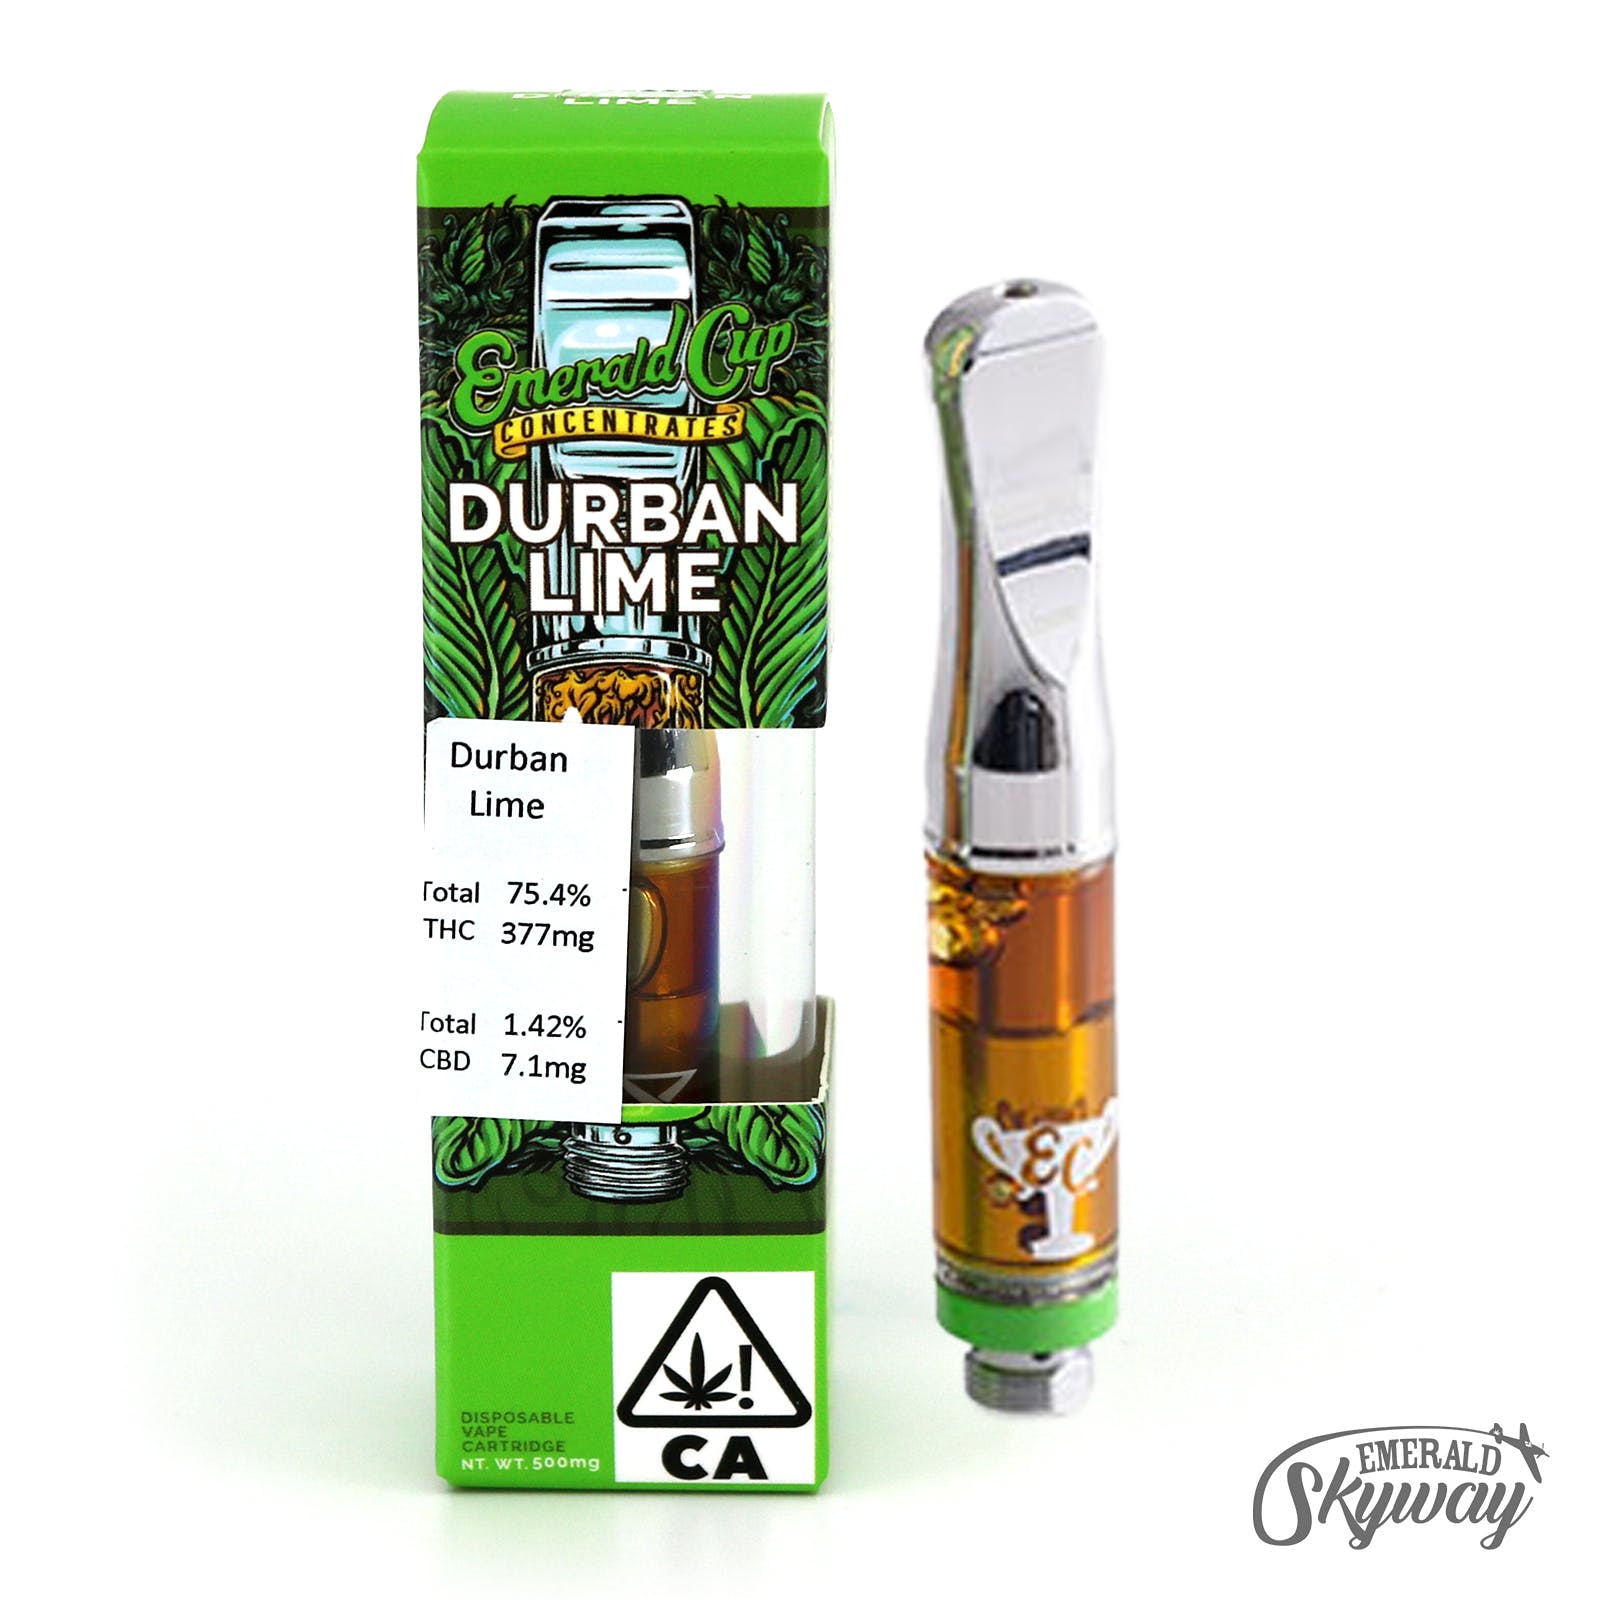 AbsoluteXtracts: Durban Lime Cartridge